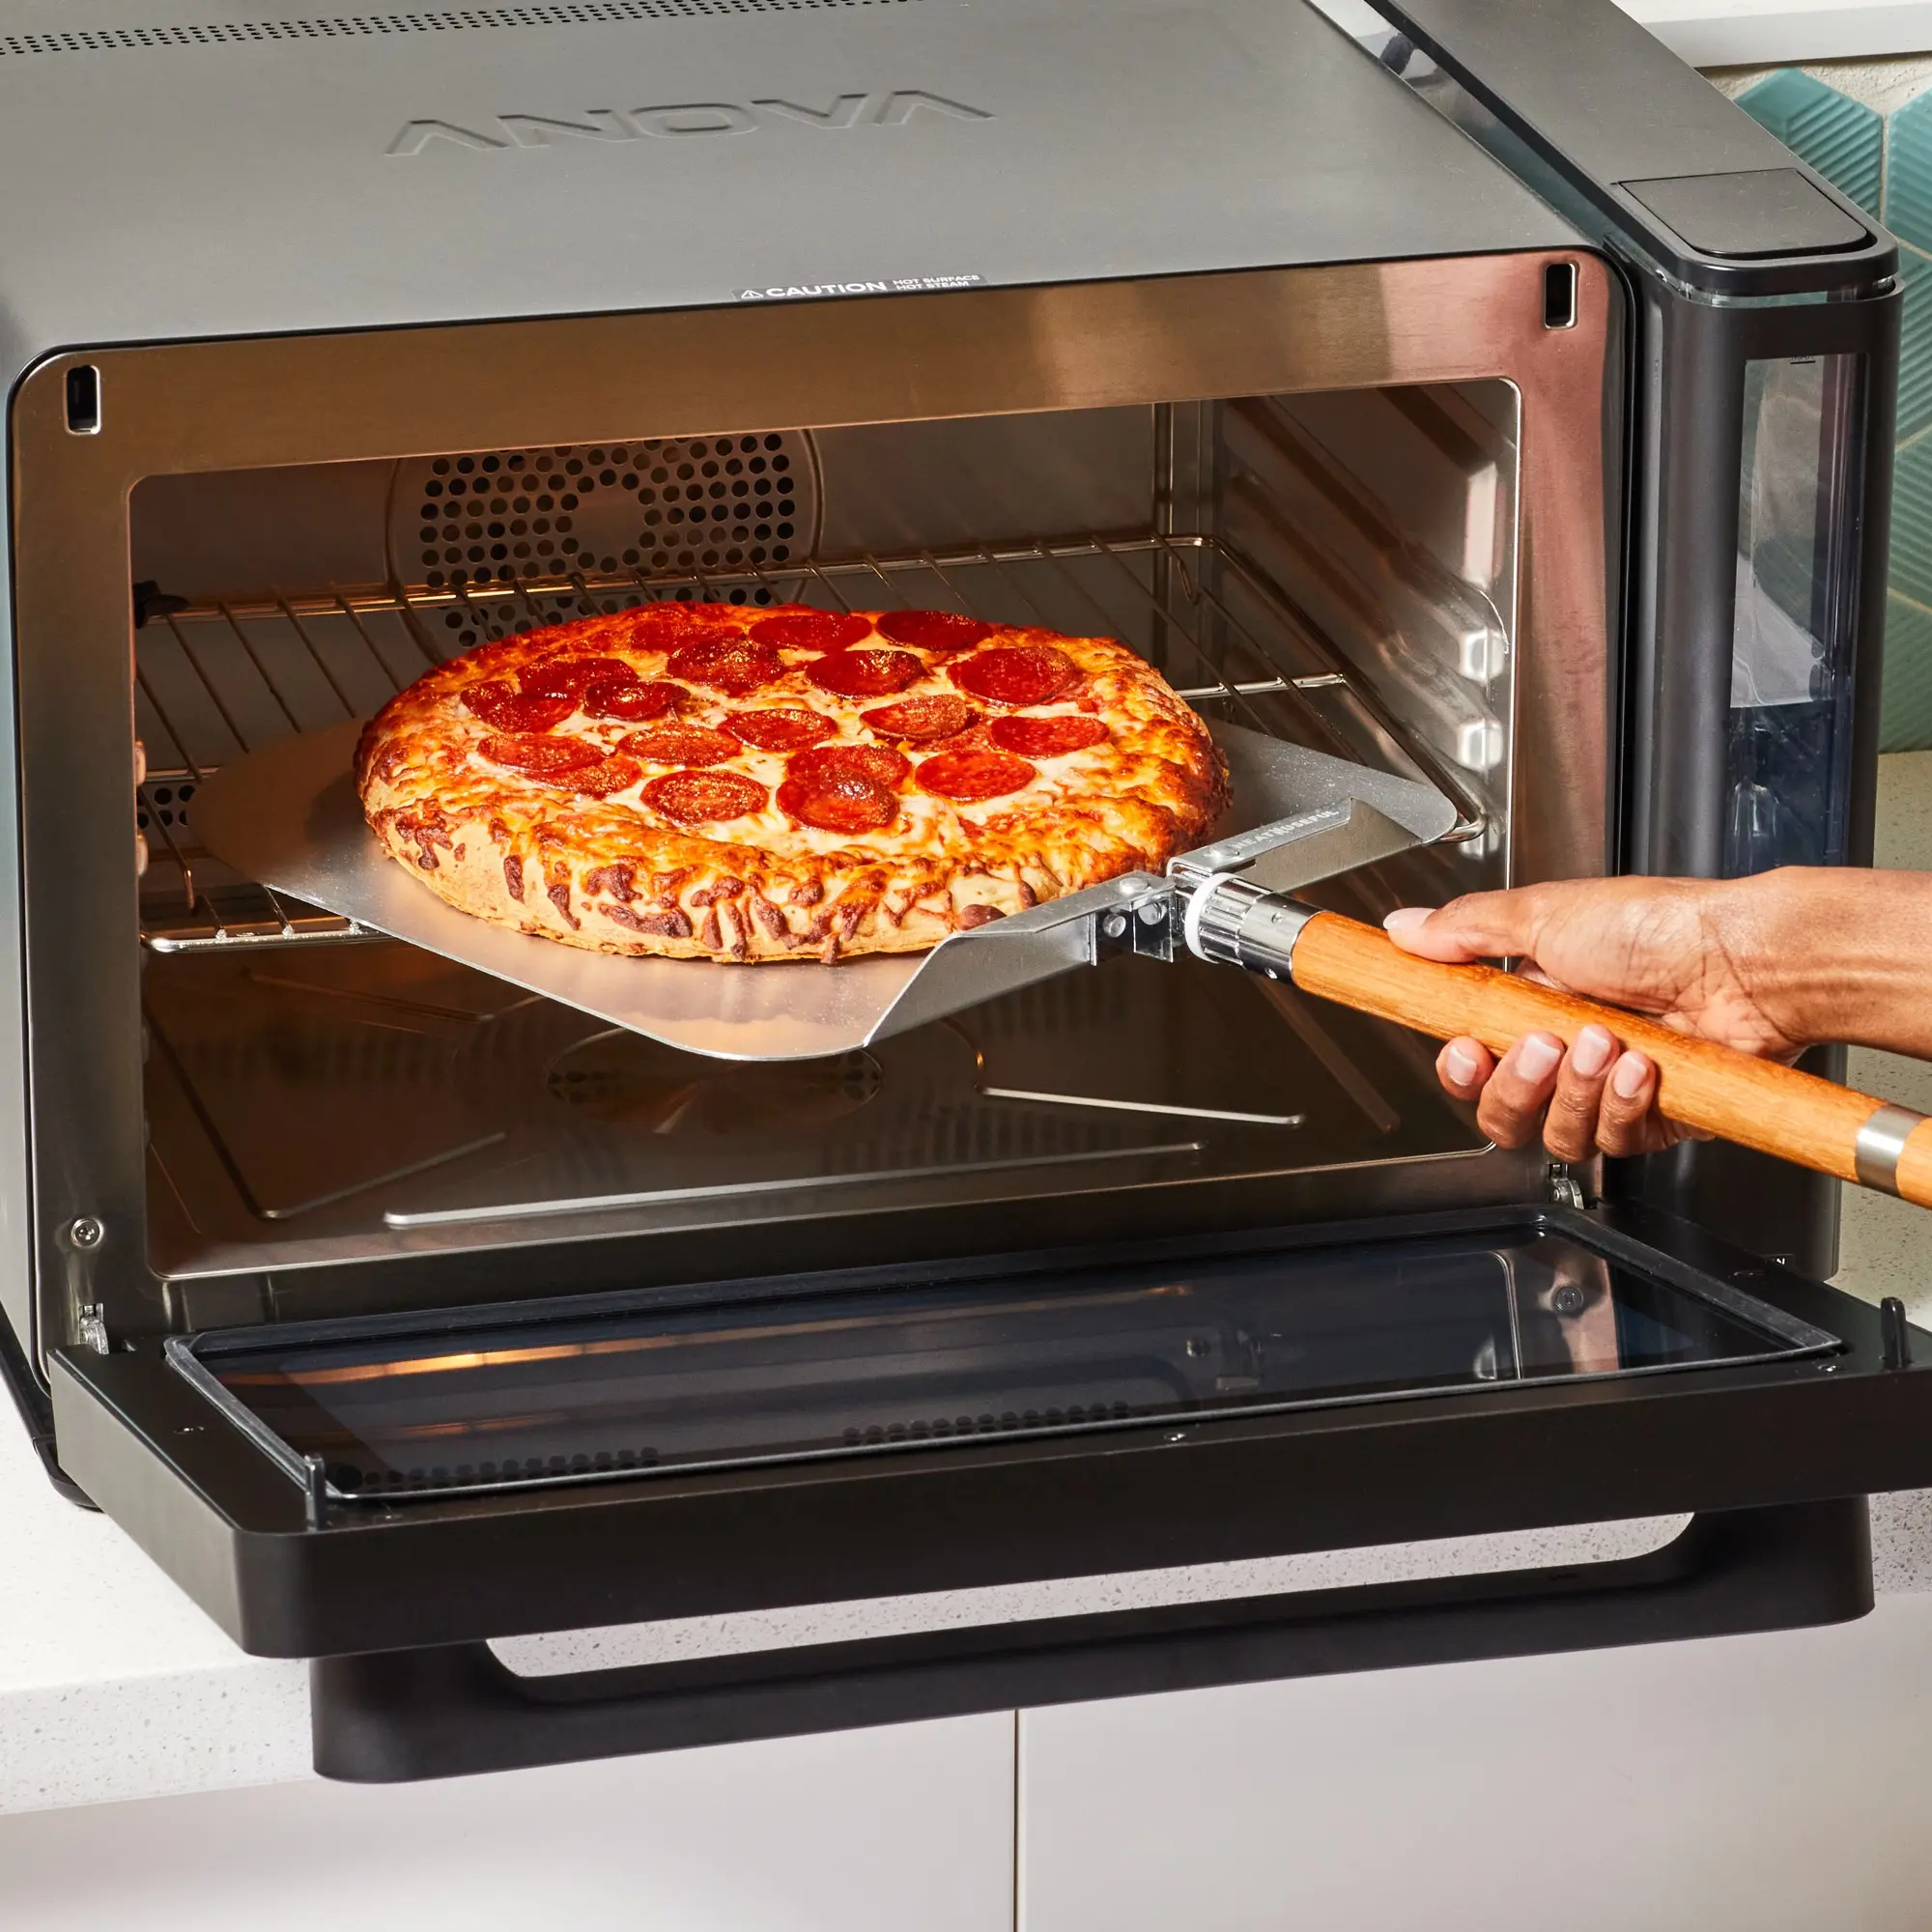 bake pizza in the oven - What is the best temperature for a pizza oven